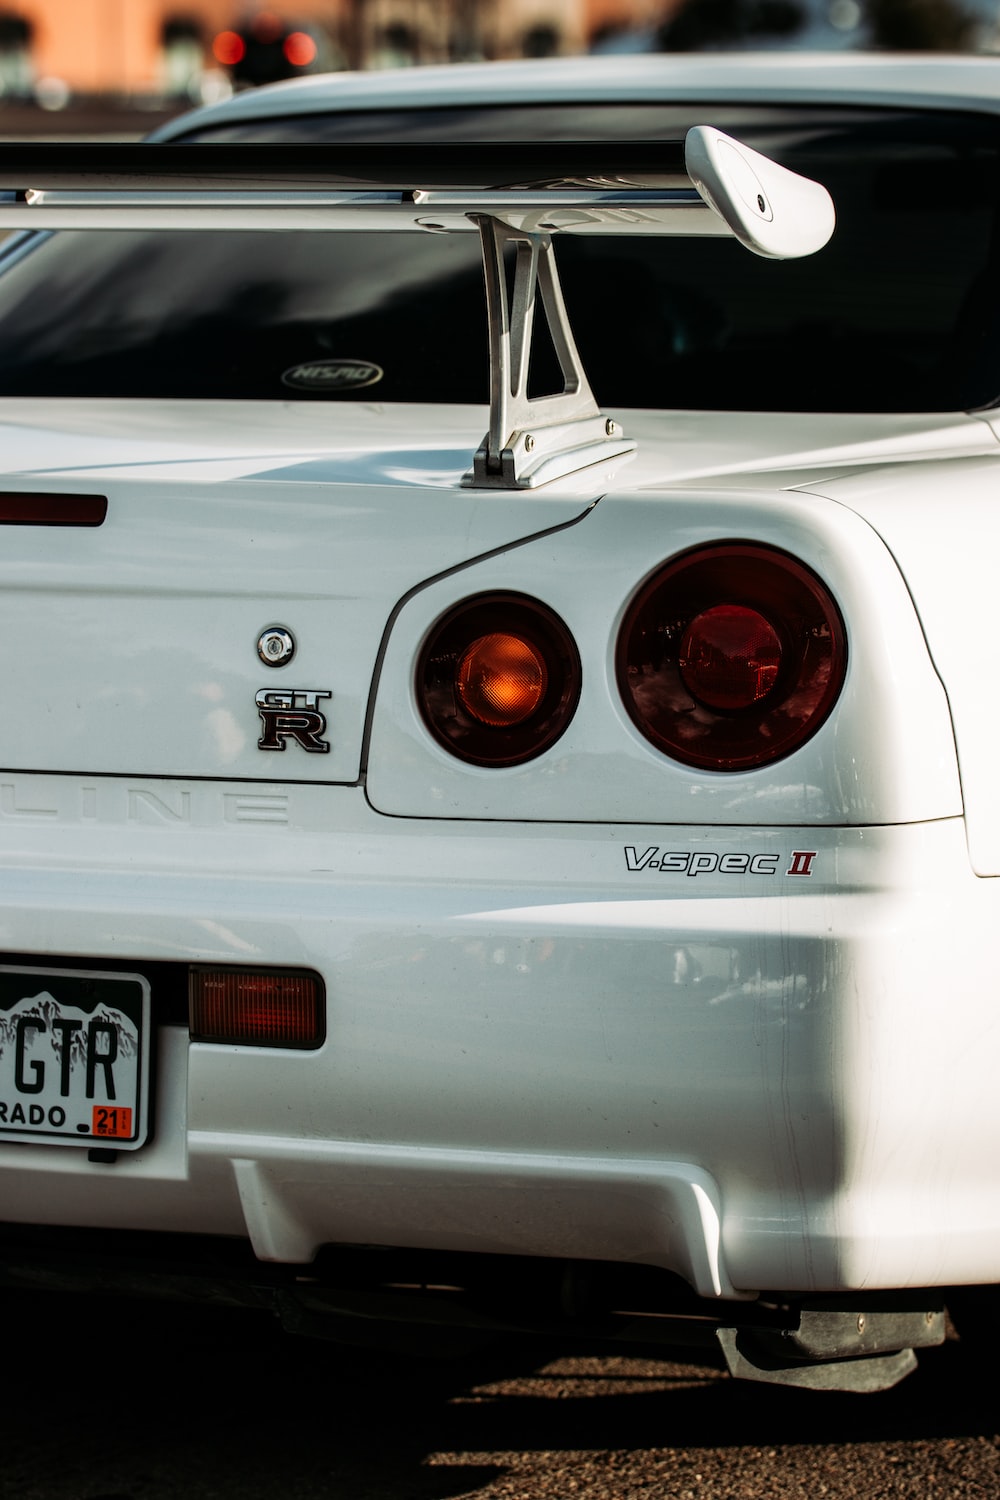 Nissan Gtr R34 Picture. Download Free